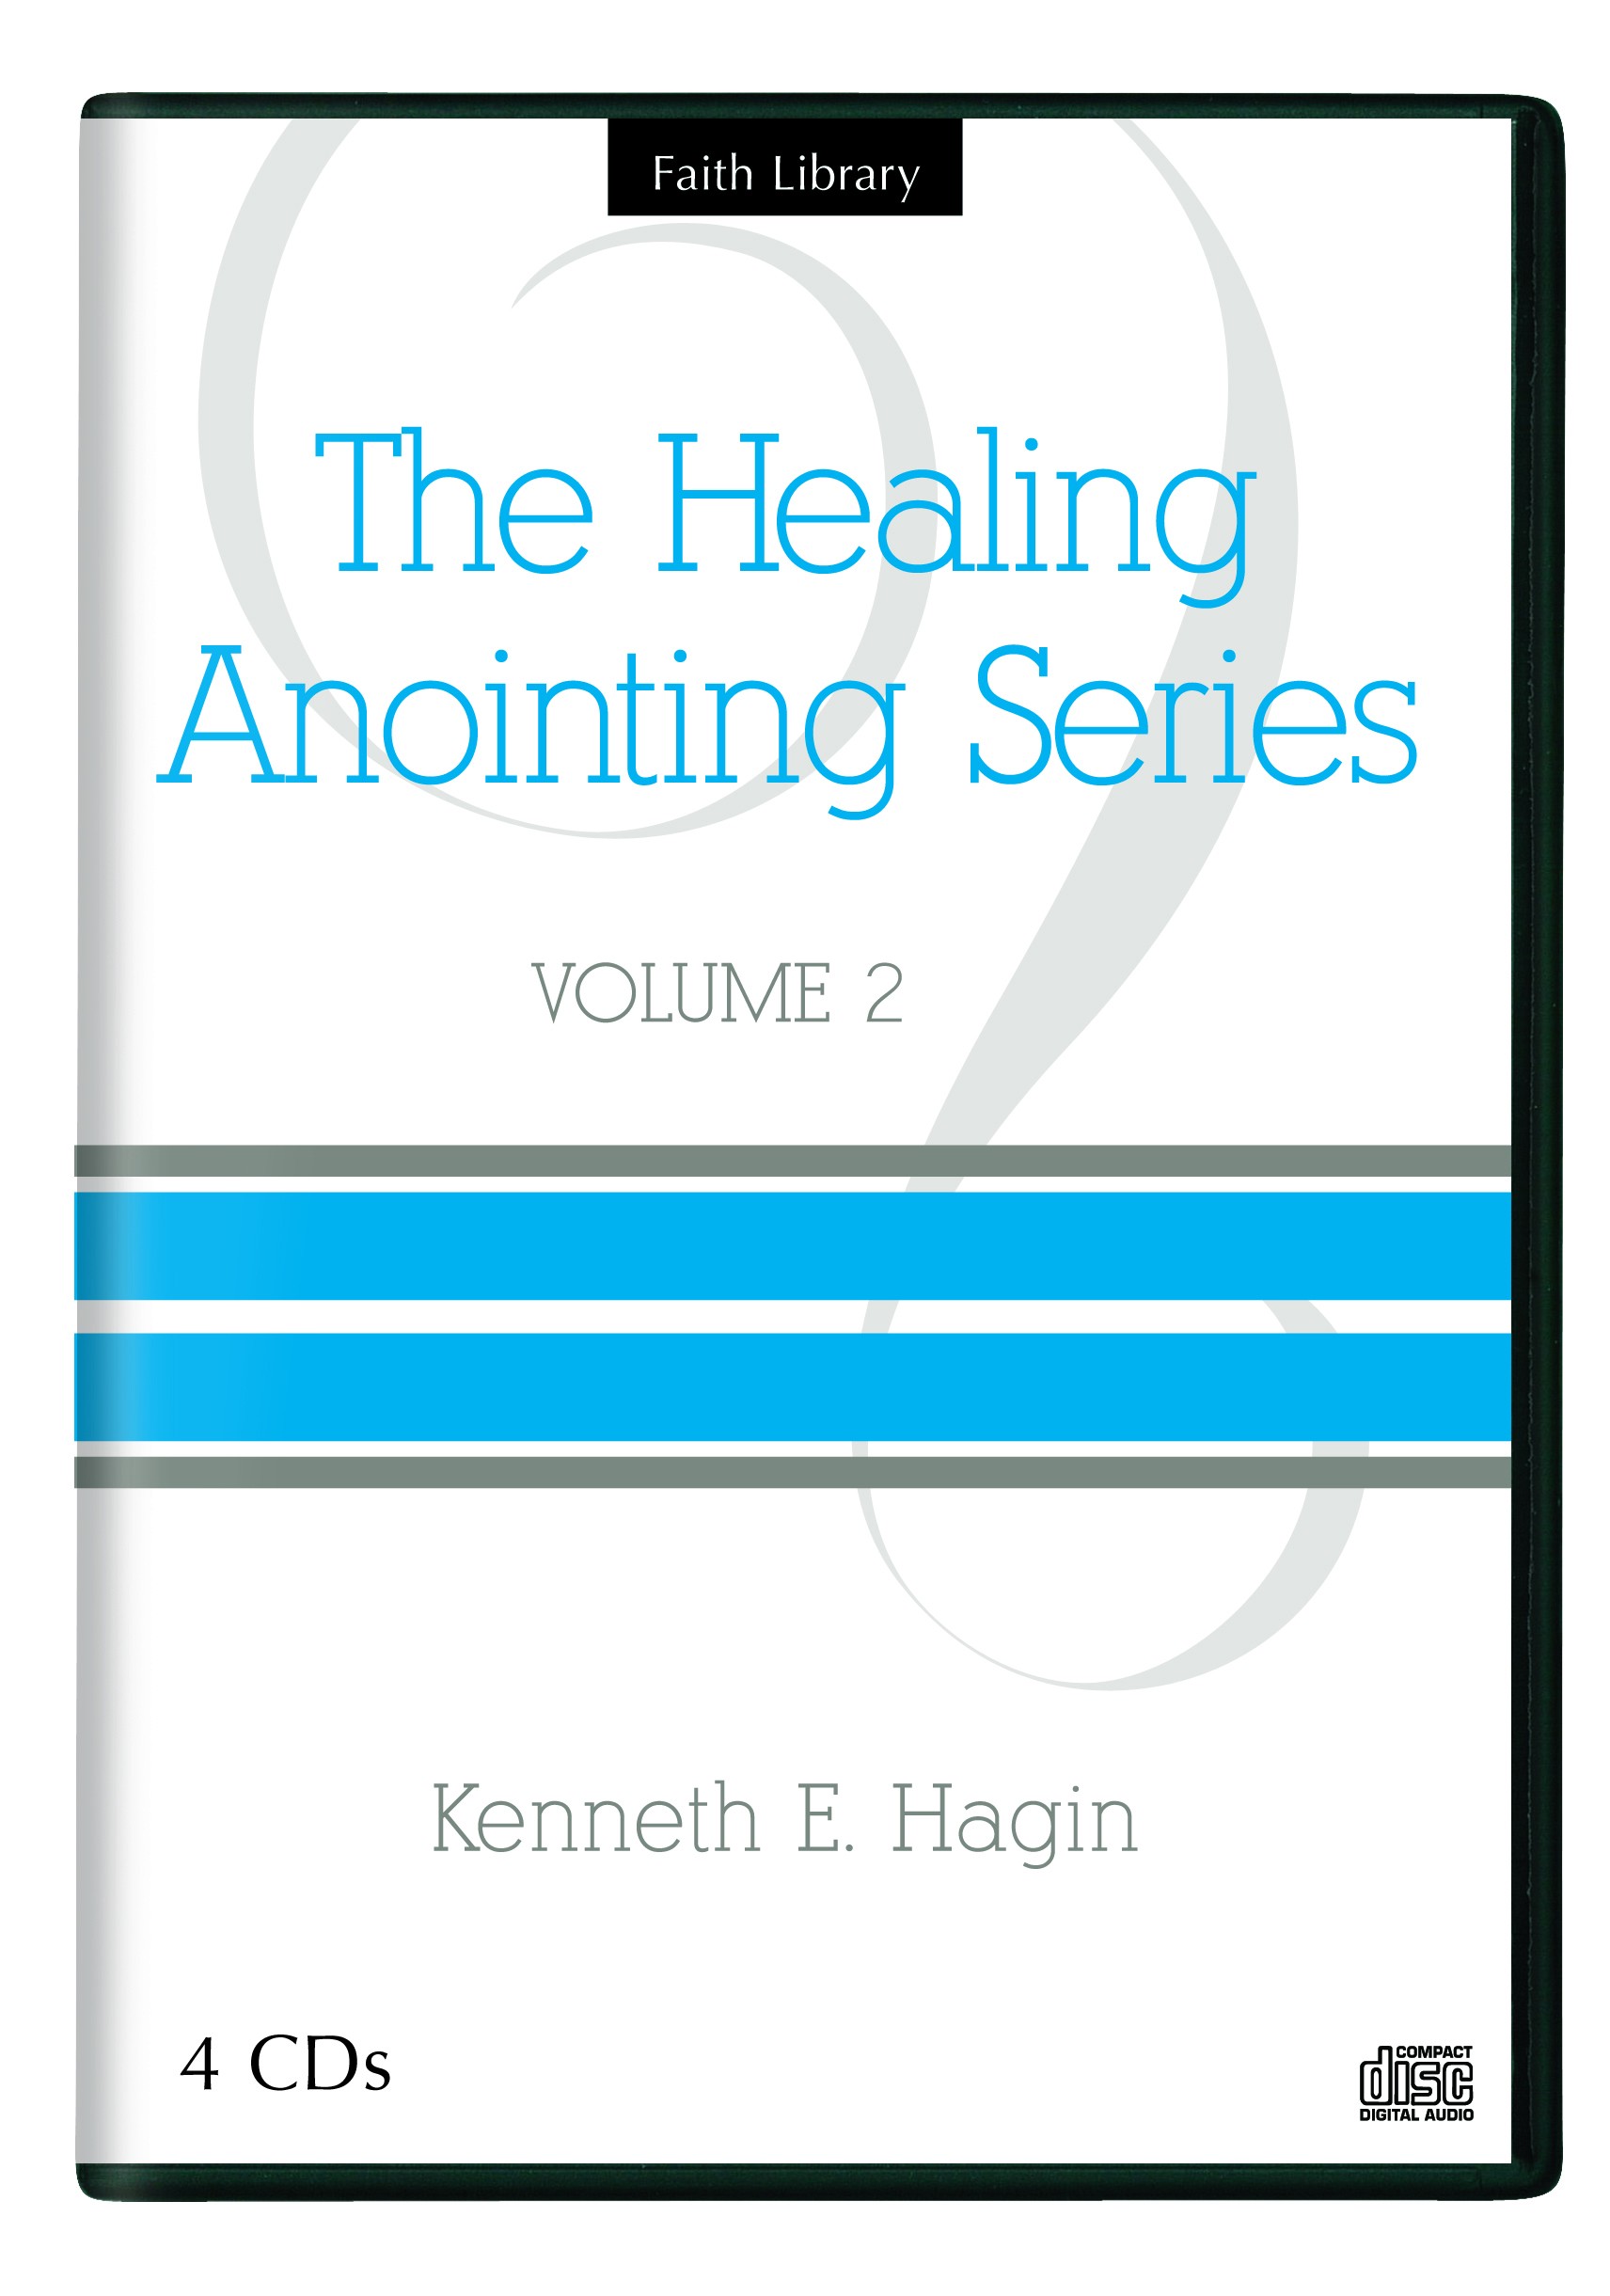 The Healing Anointing Series Vol 2 (4 CDs) - Kenneth E Hagin